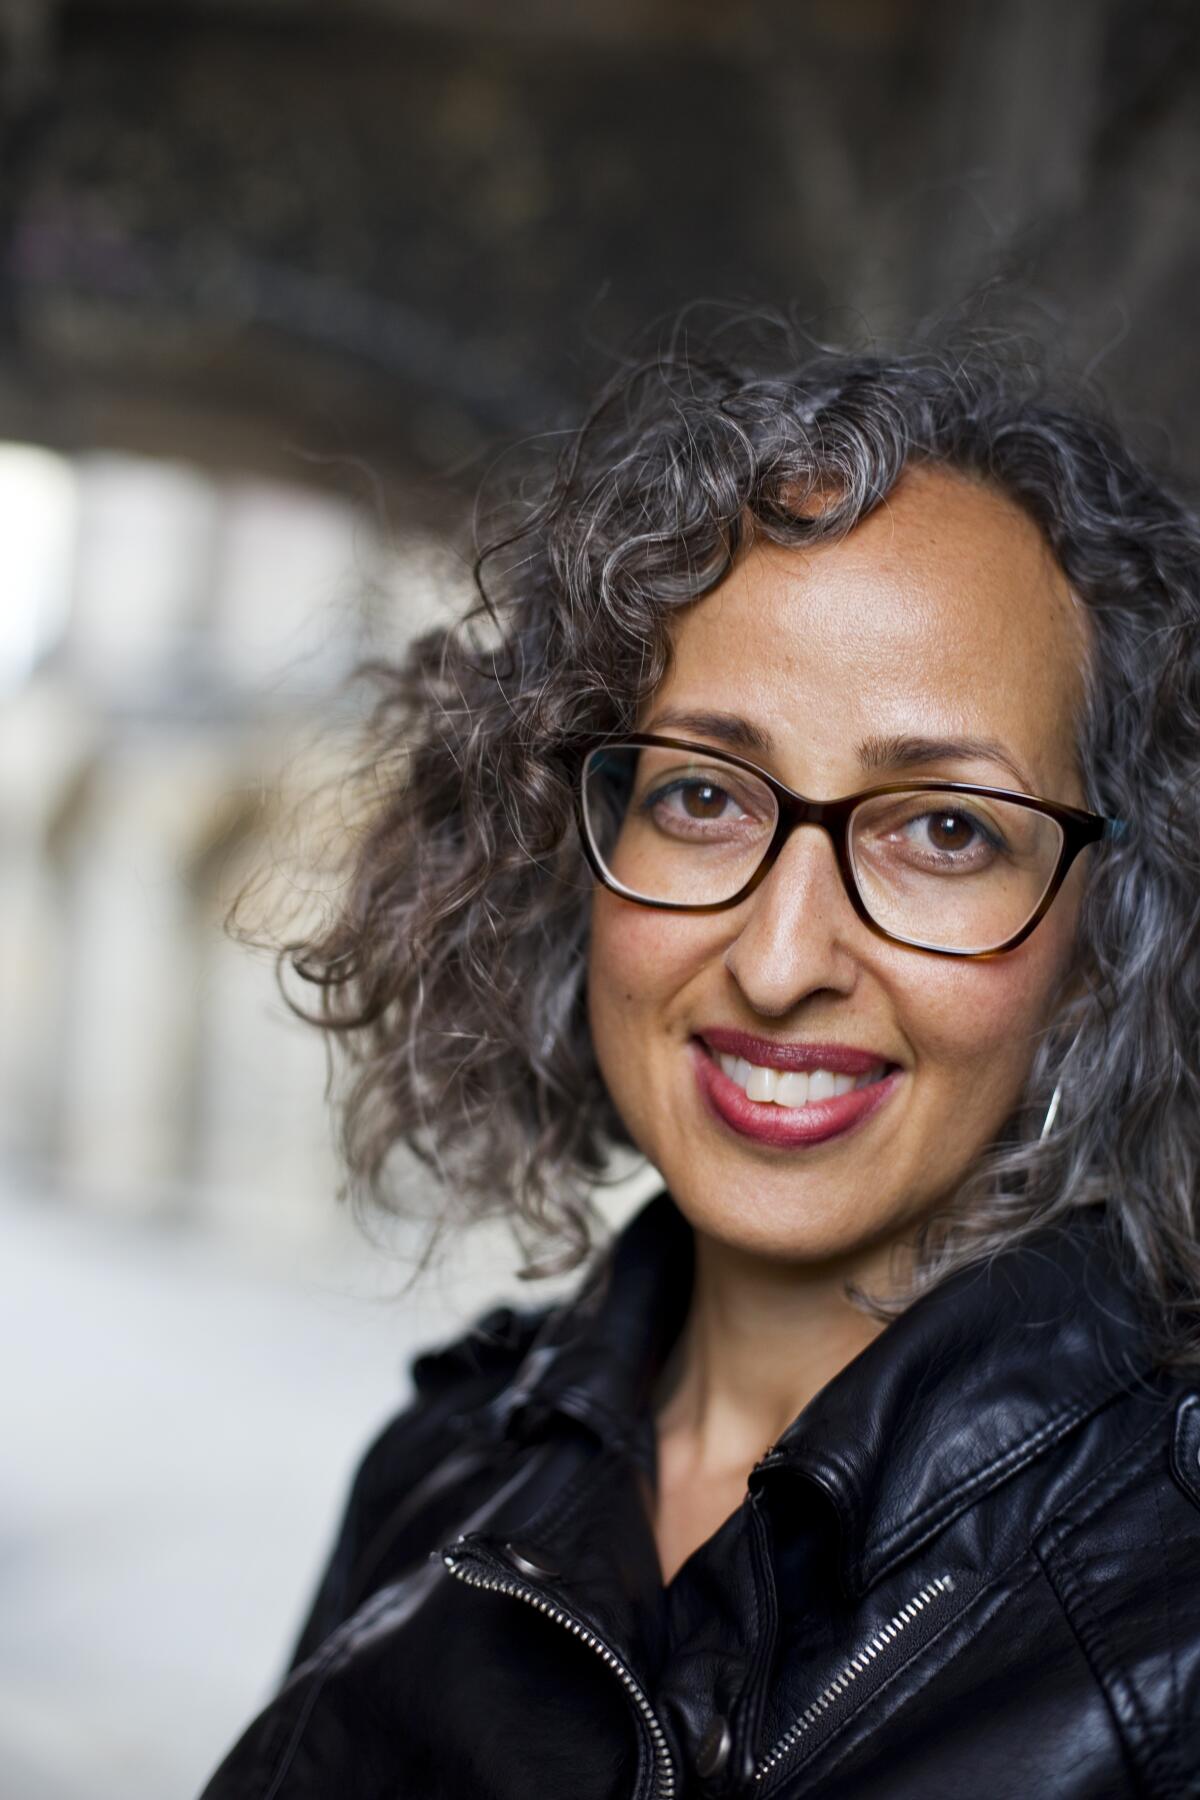 A portrait of a woman with curly hair and glasses and wearing a black jacket.